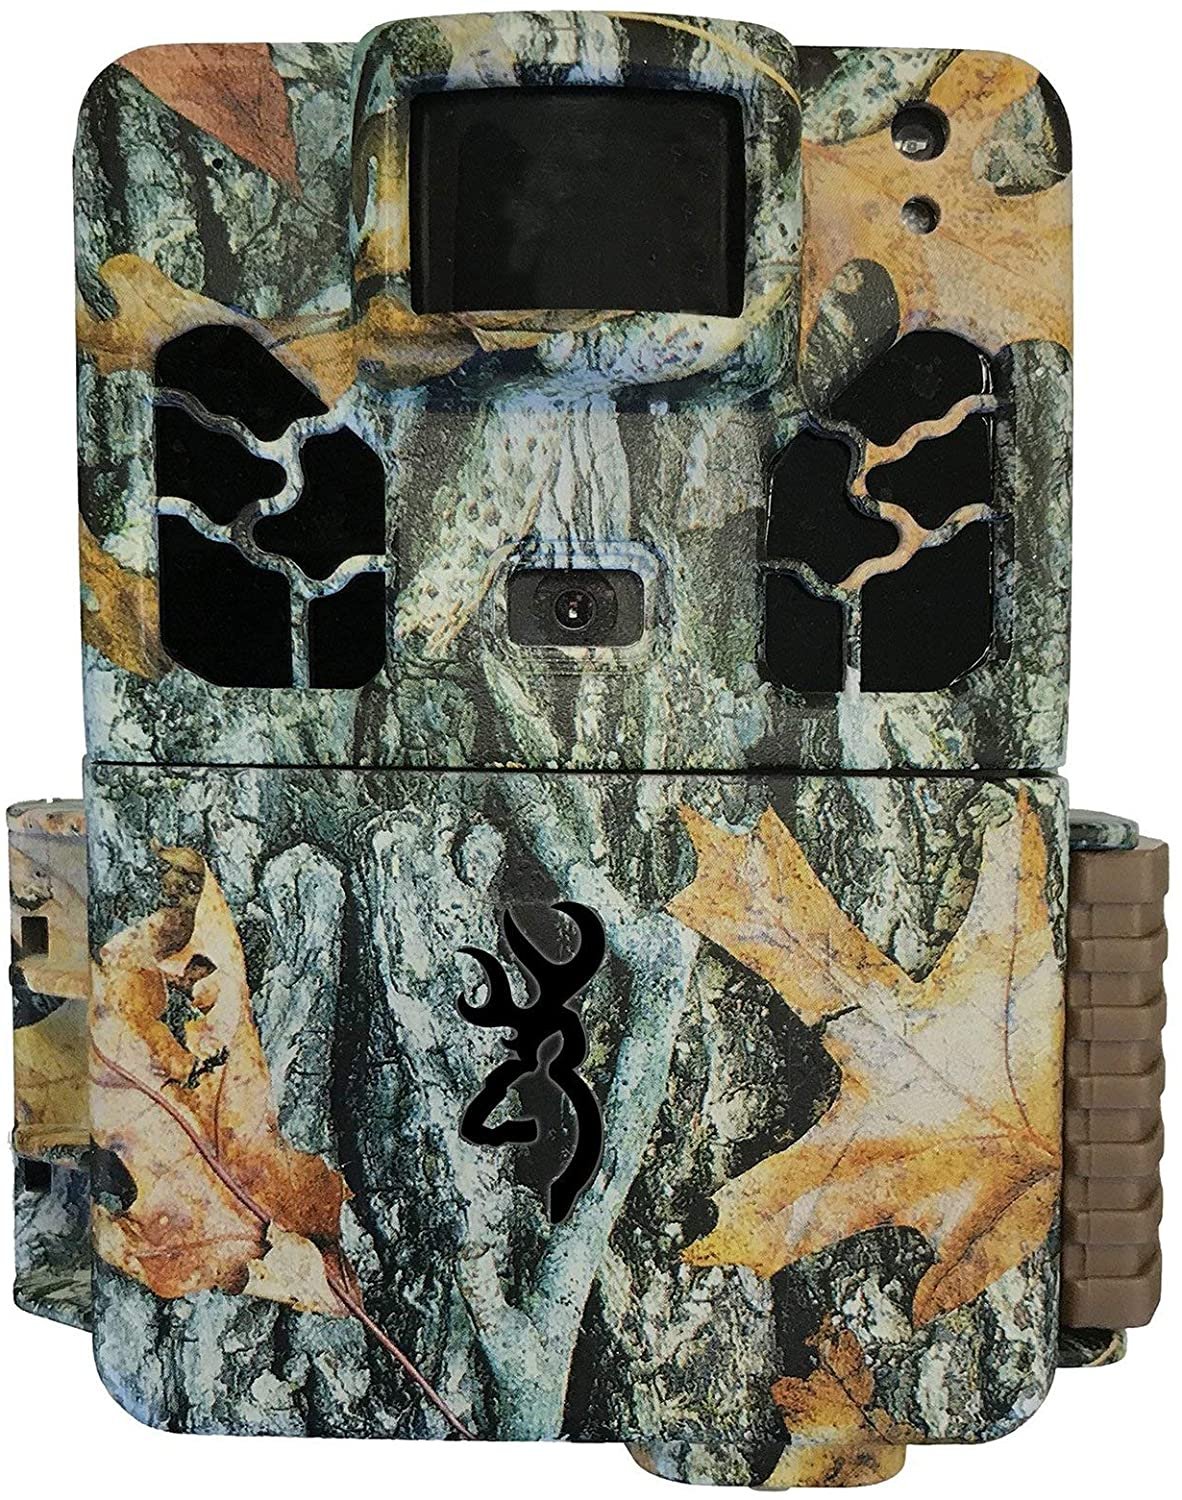 Browning Dark Ops Apex Trail Camera with Batteries, SD Card, Card Reader, and Mount - image 2 of 5